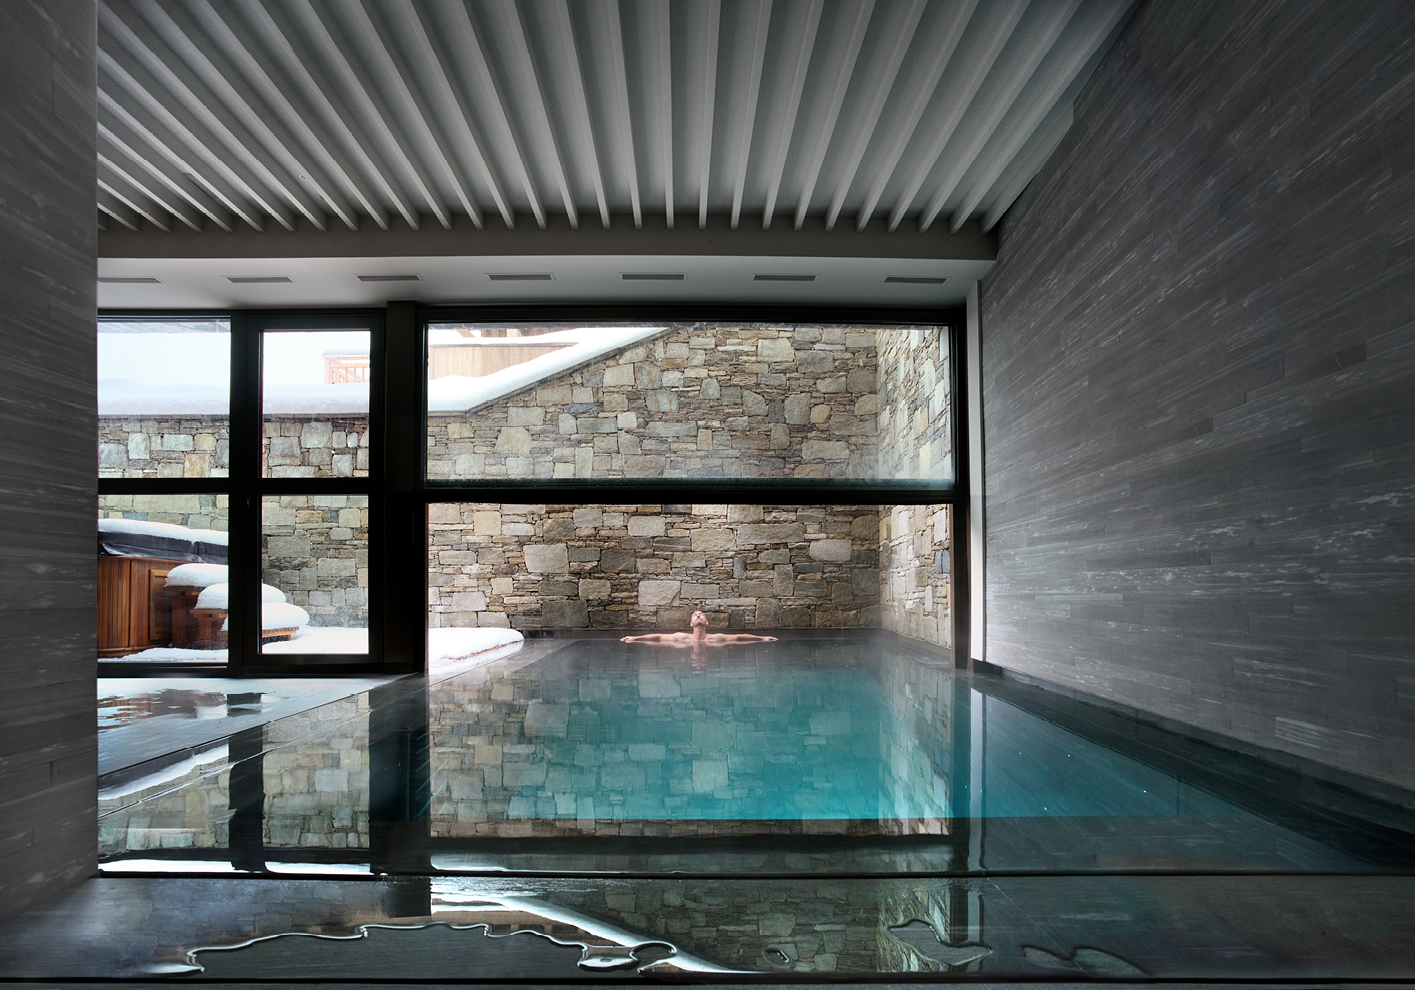 The indoor pool (Photograph by Philipe Vile)